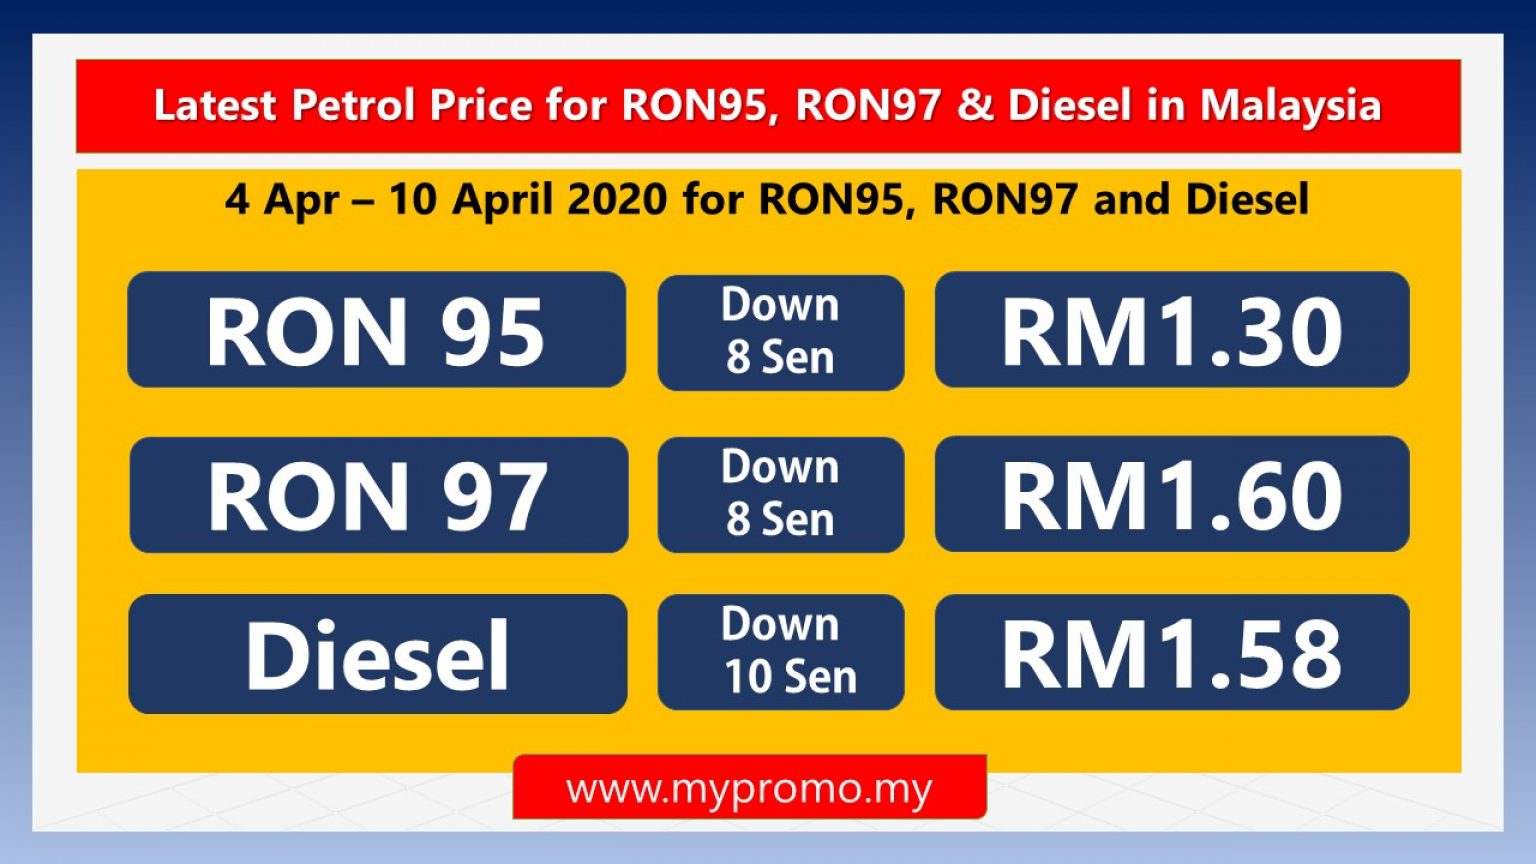 Latest Petrol Price for RON95, RON97 & Diesel in Malaysia ...